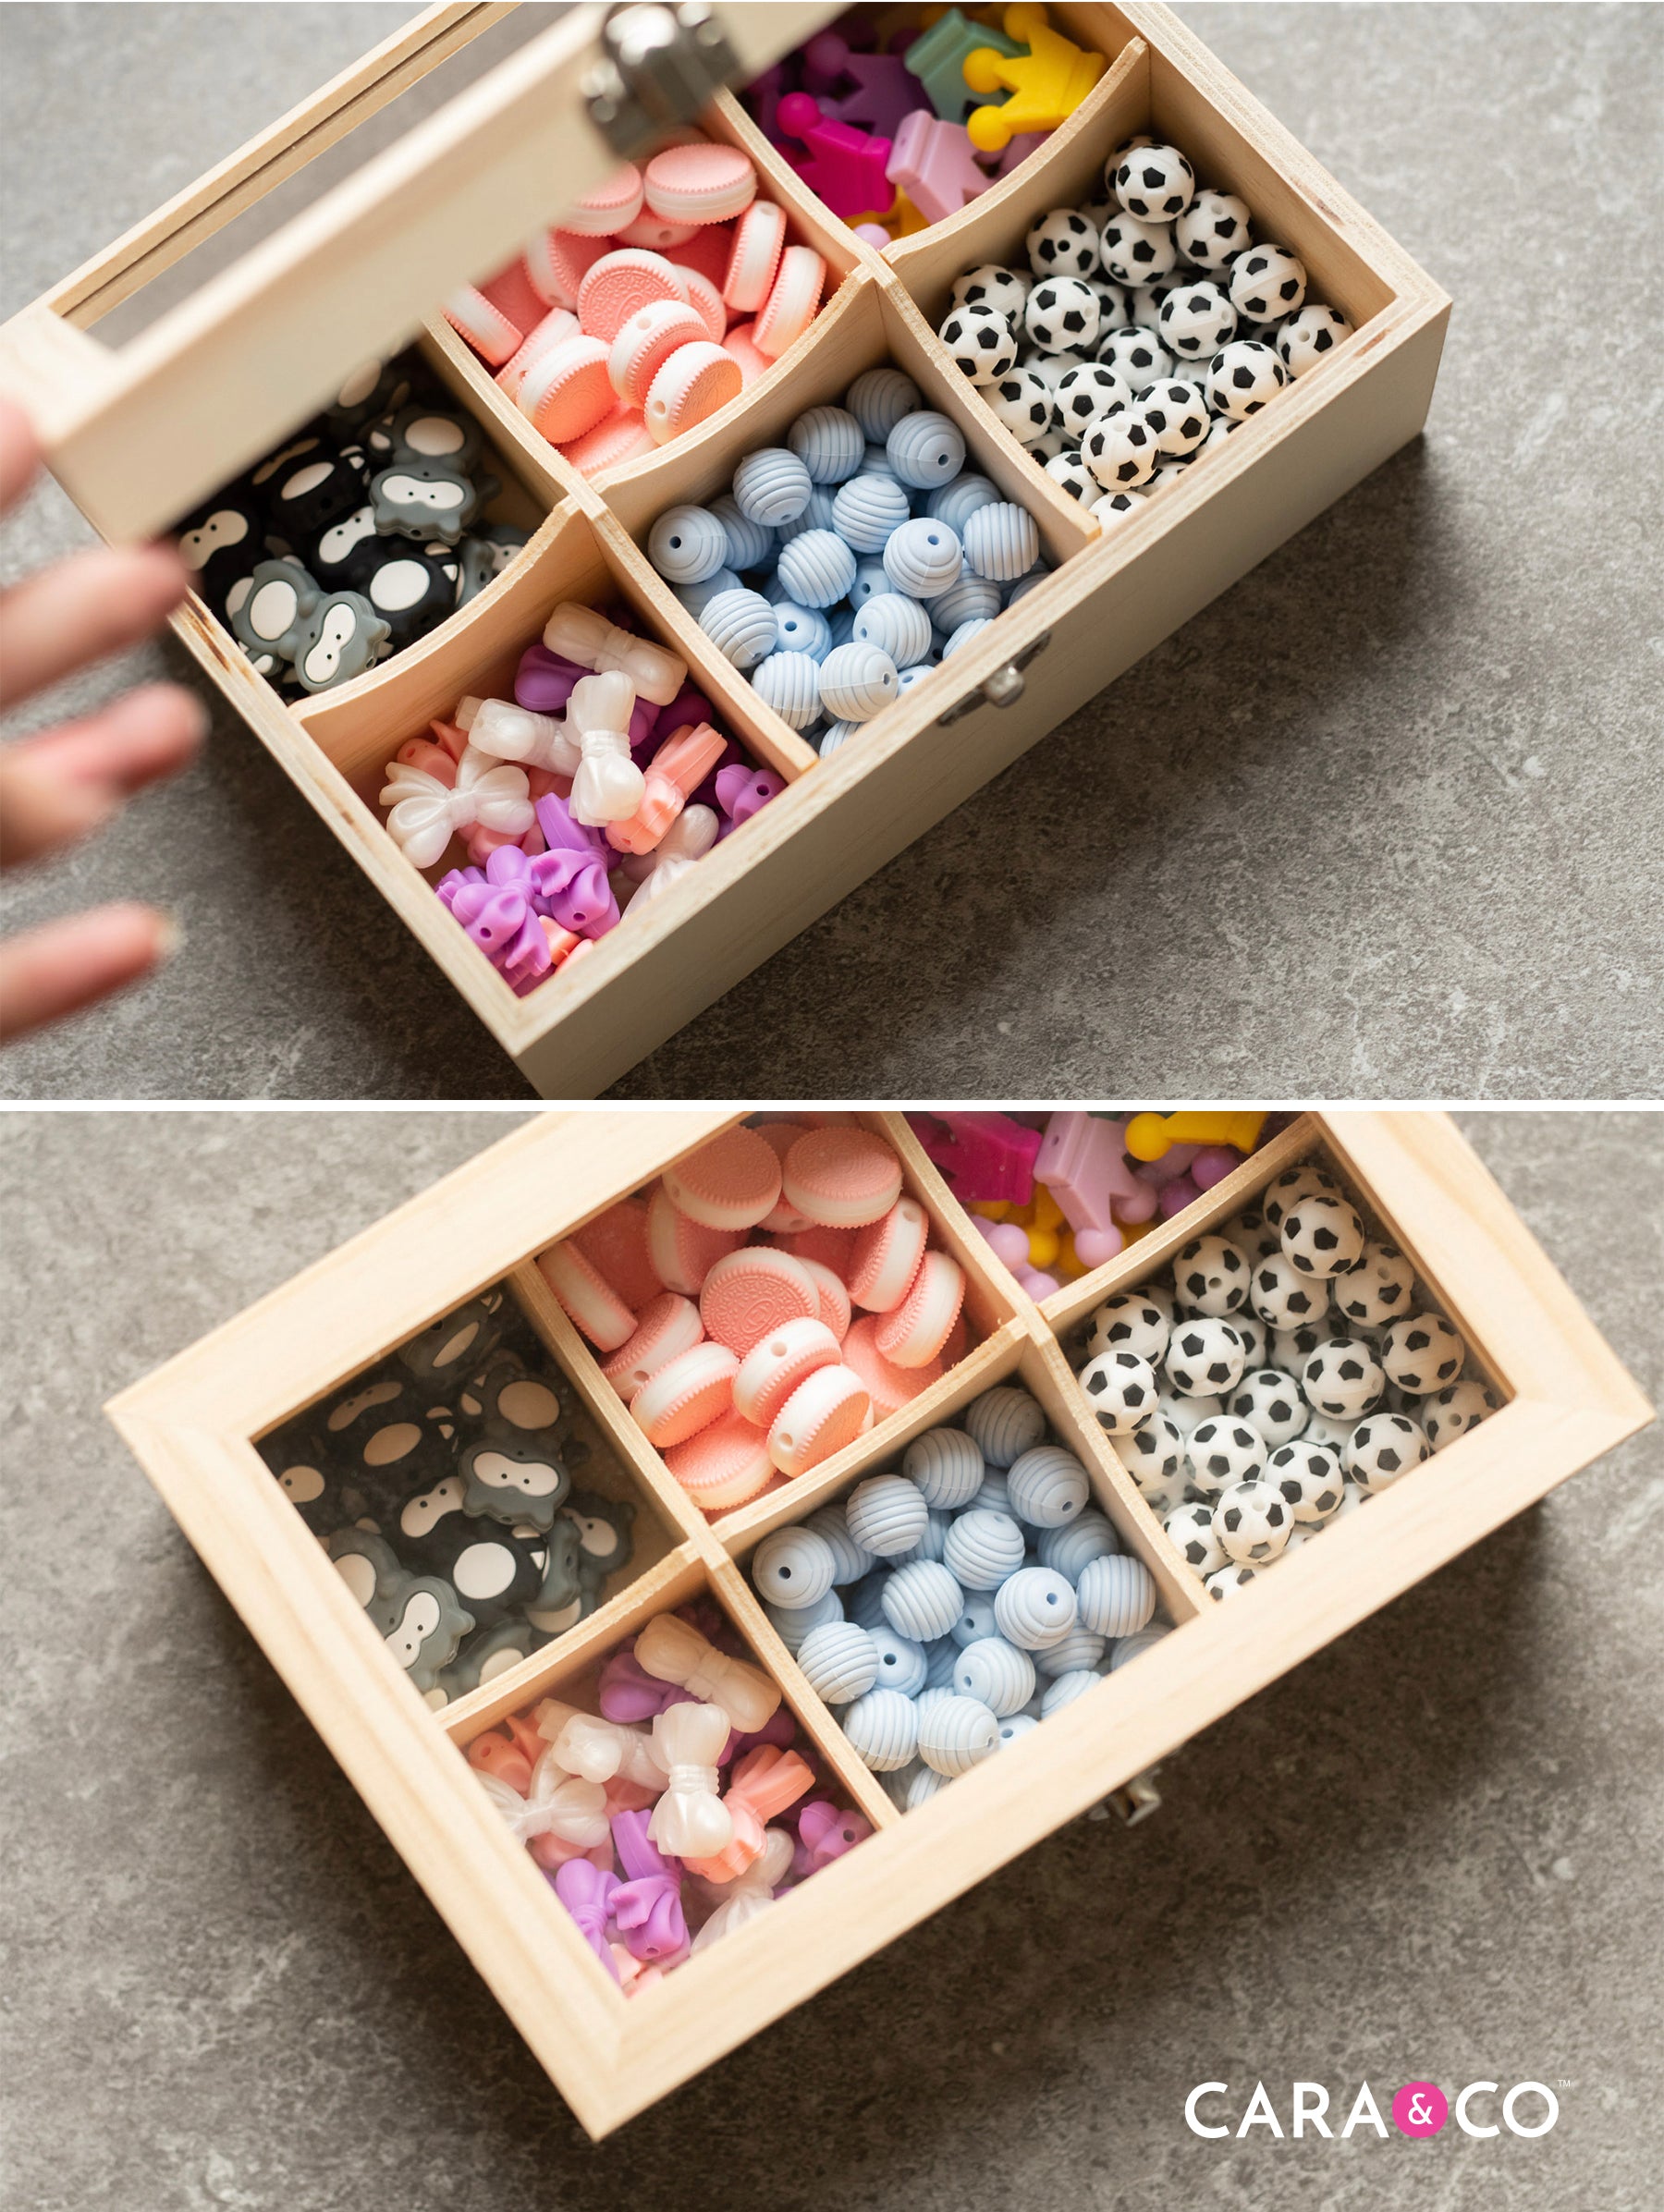 Cheap storage hacks from the dollar store